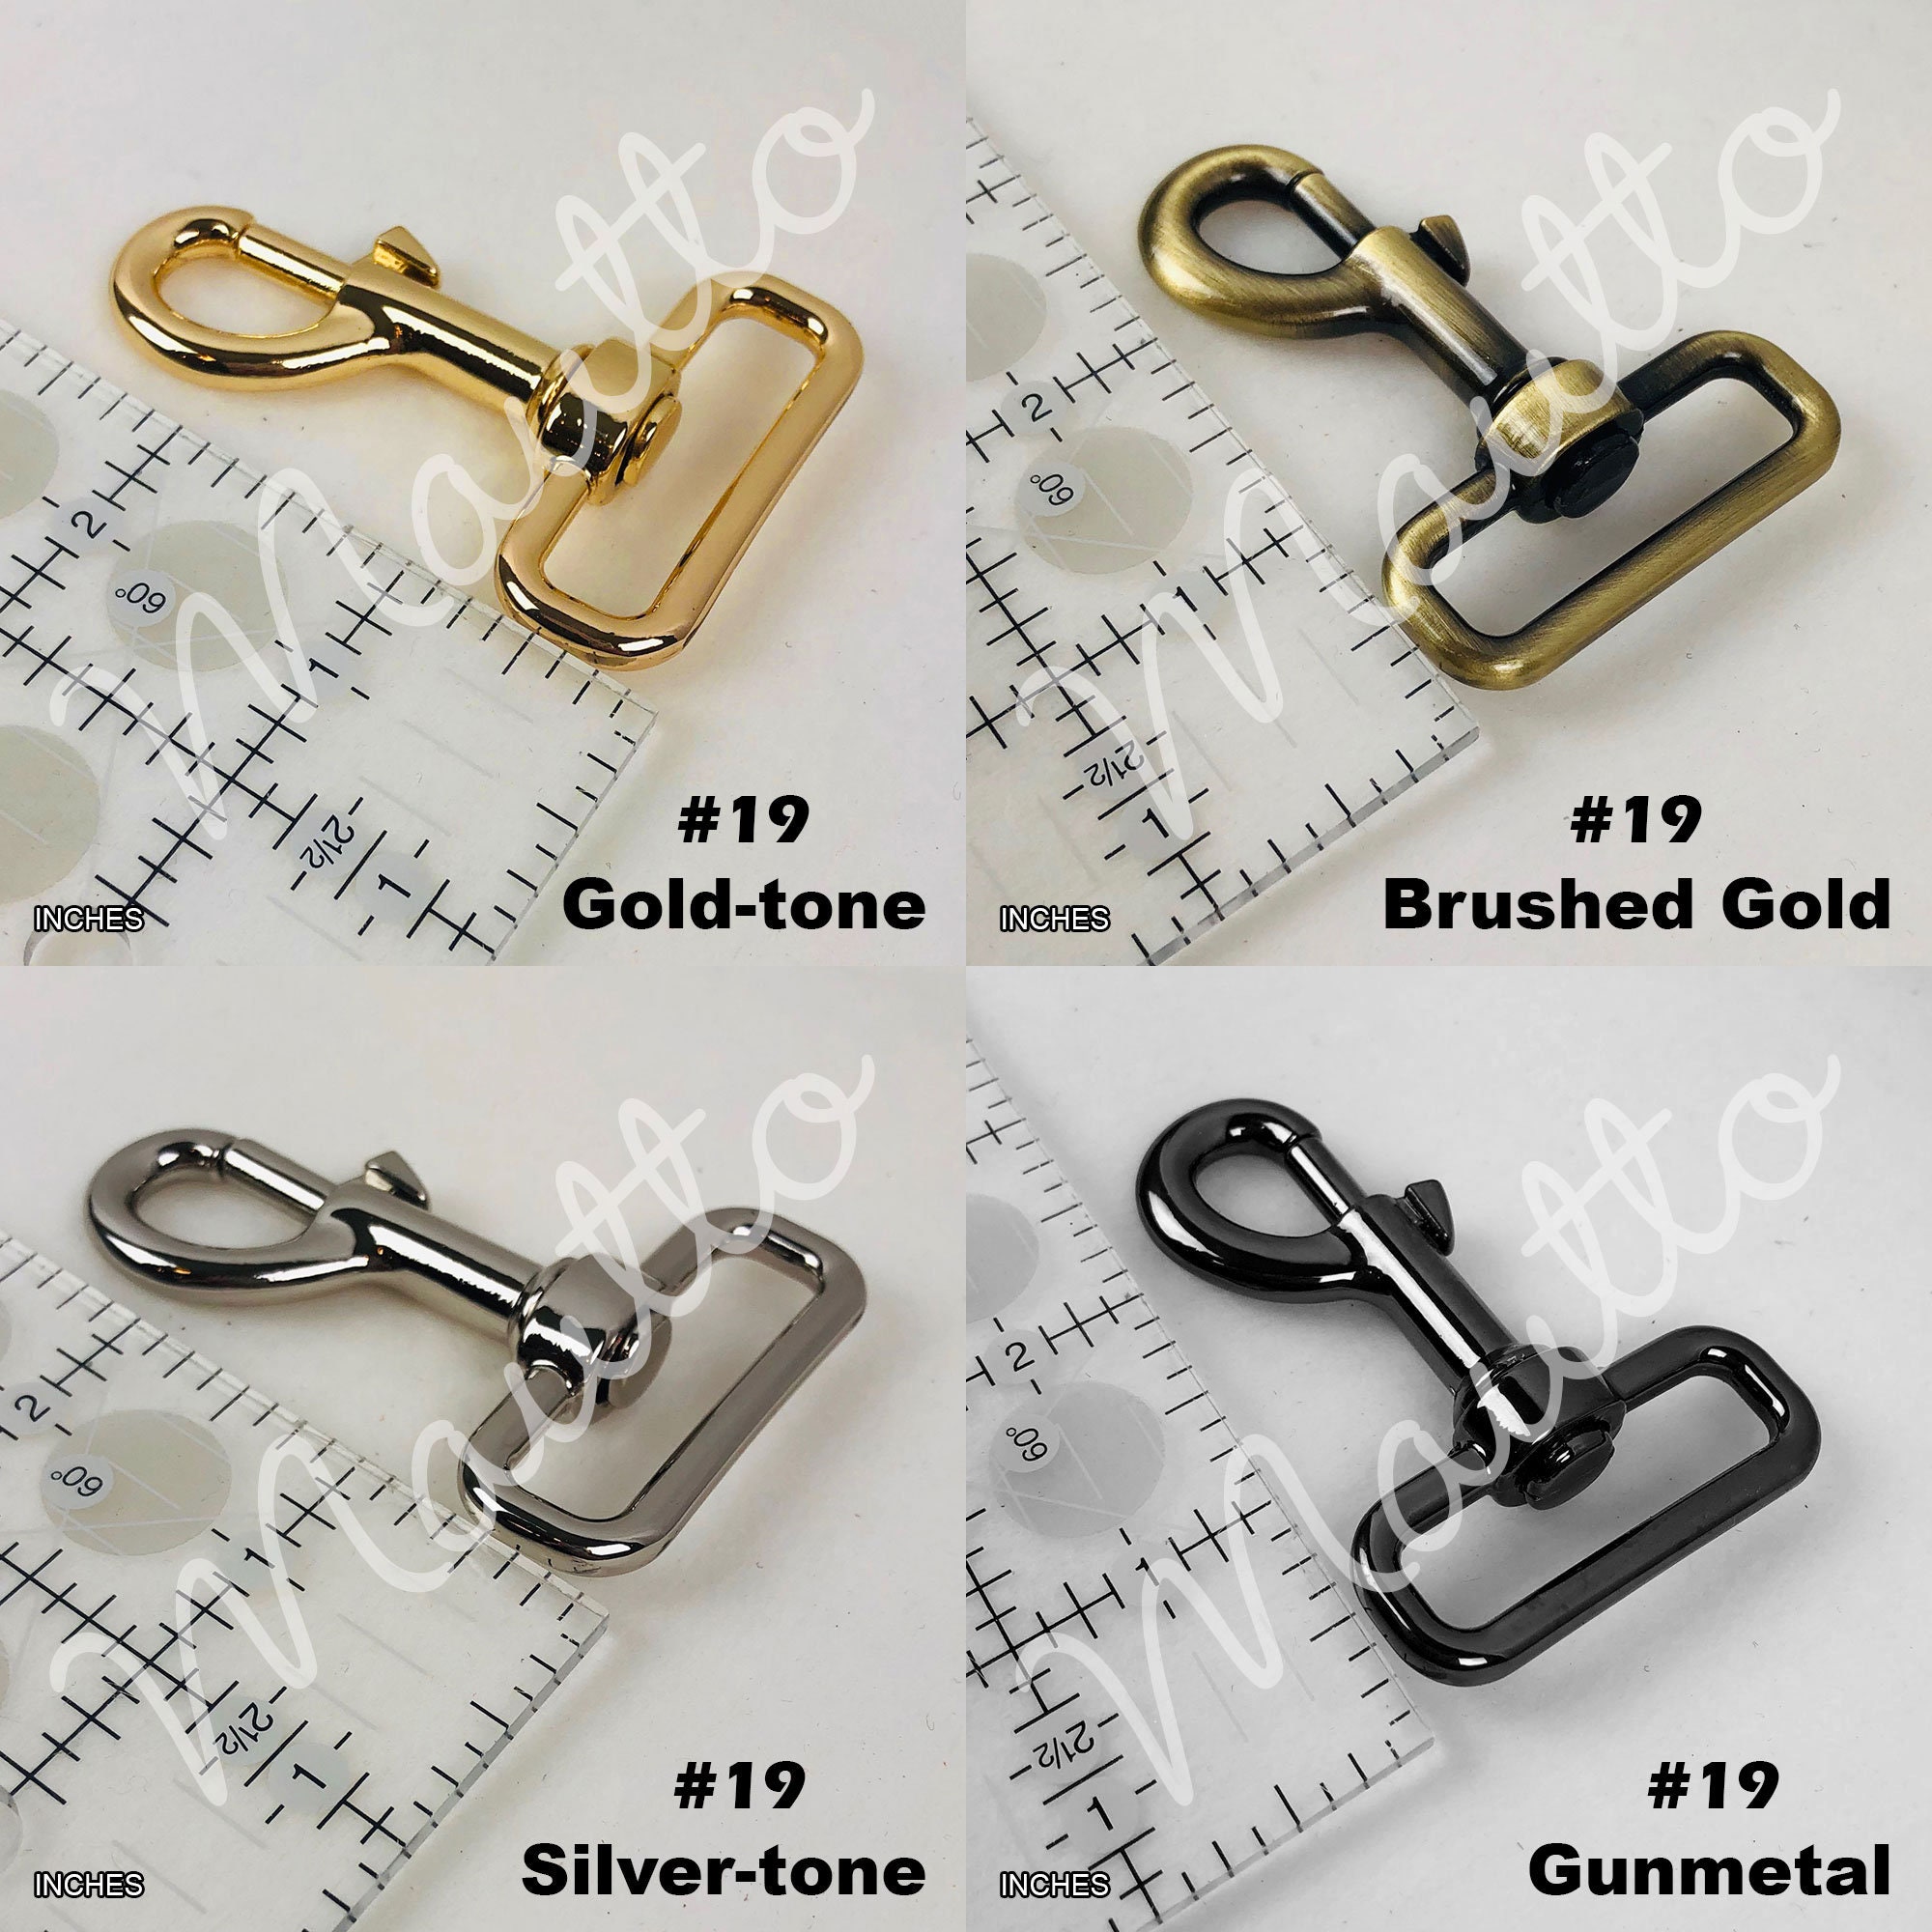 Key Ring/chain Accessory With Swiveling Clip Gold or Nickel Finishes Choose  Clip Style LV Key Accessory 